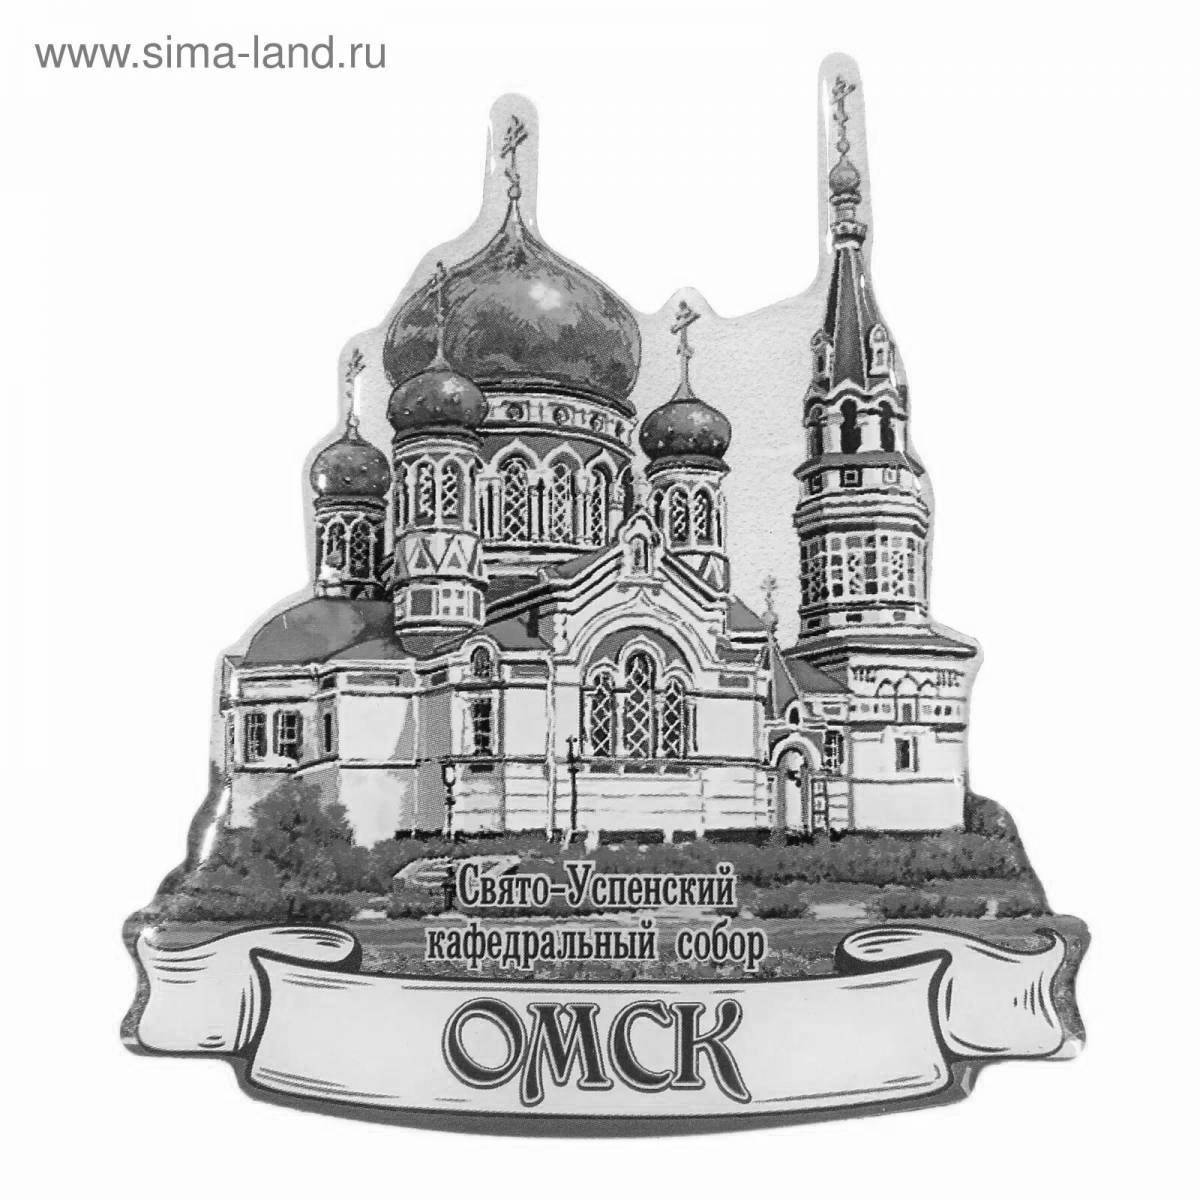 Great Omsk coloring book